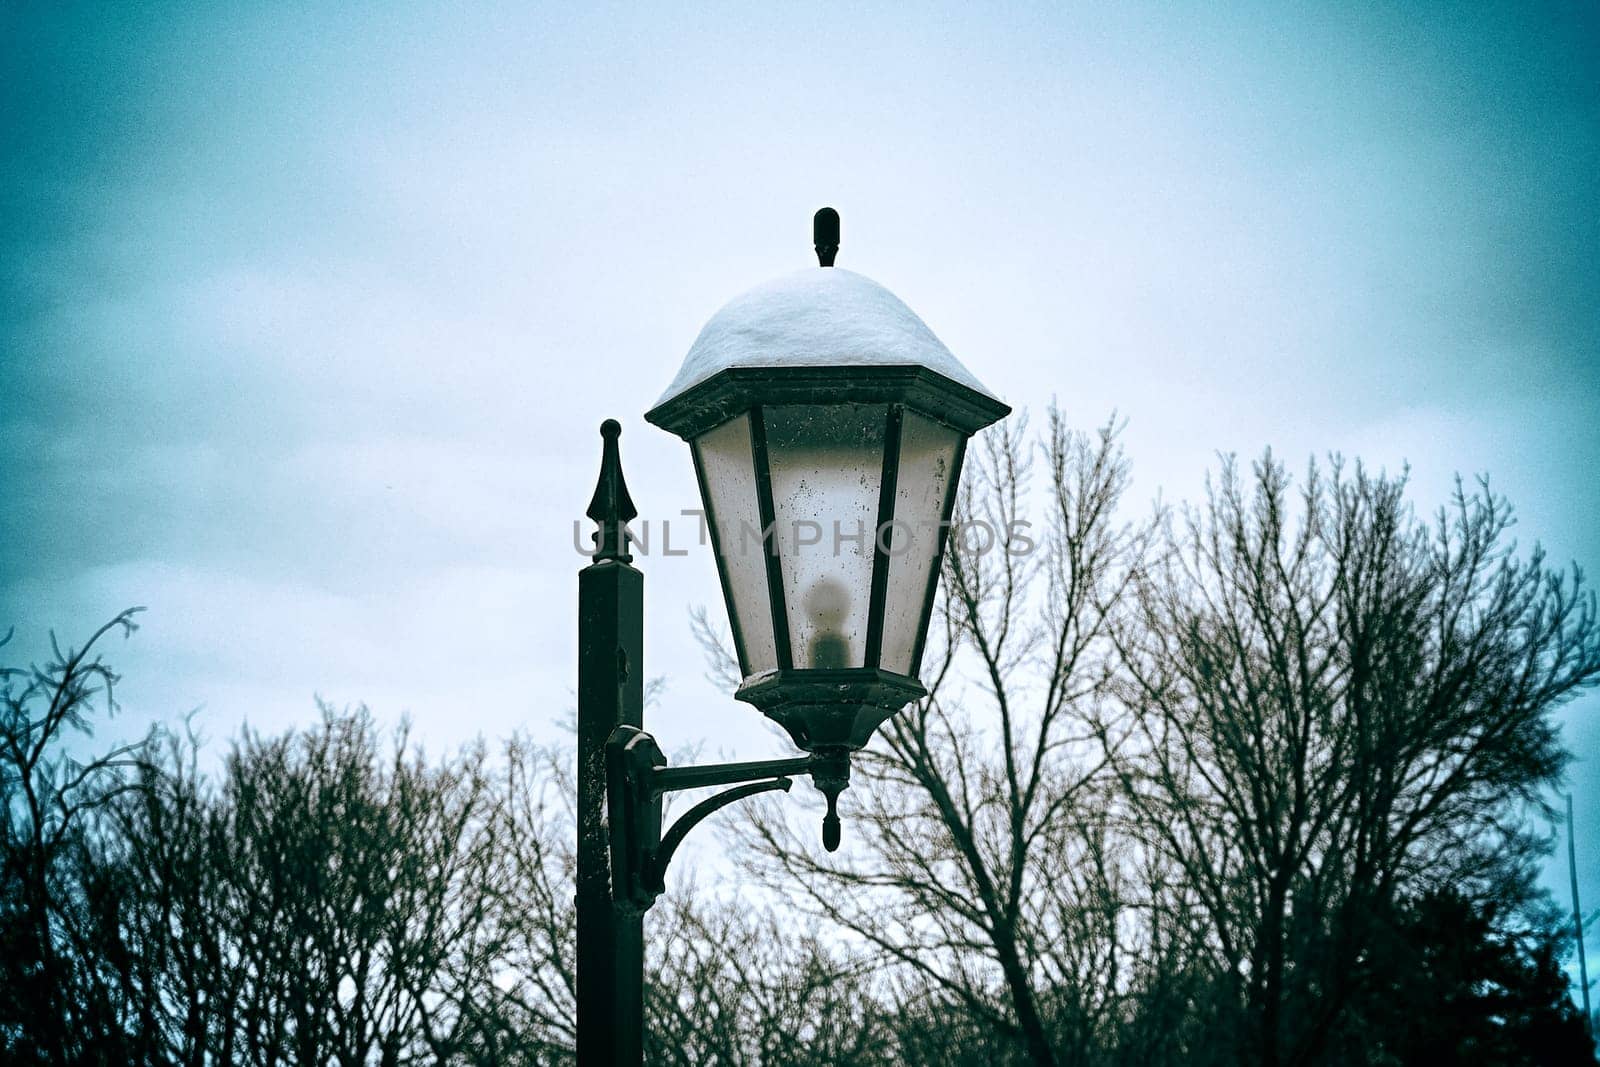 Lantern in the park in winter. Vintage style photo by DAndreev